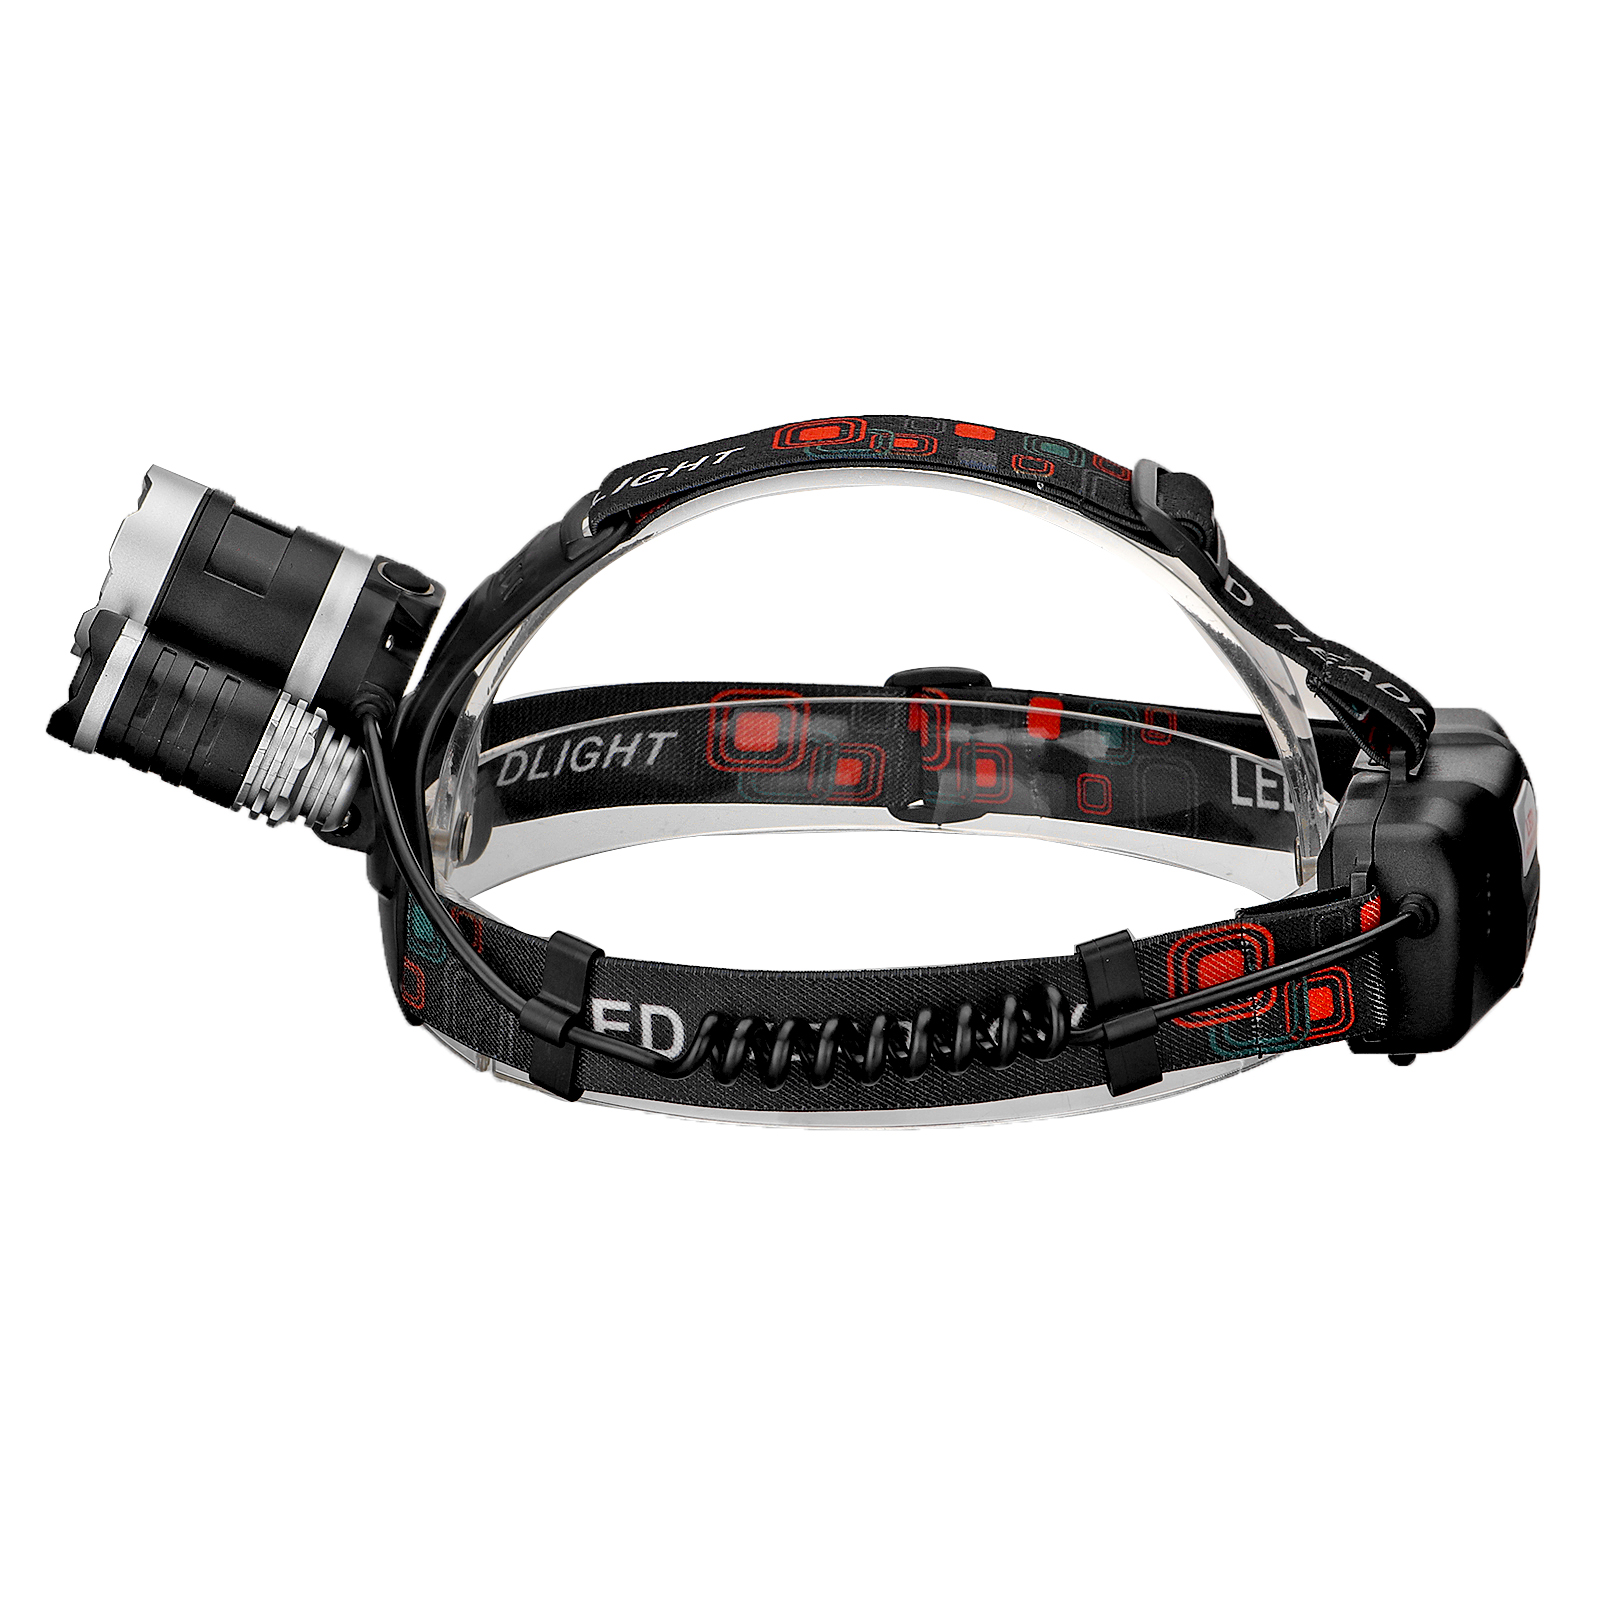 Find OUTERDO USB Rechargeable Headlamp 6400mAh IP65 Waterproof Outdoor Headlight 4 Light Modes for Sale on Gipsybee.com with cryptocurrencies